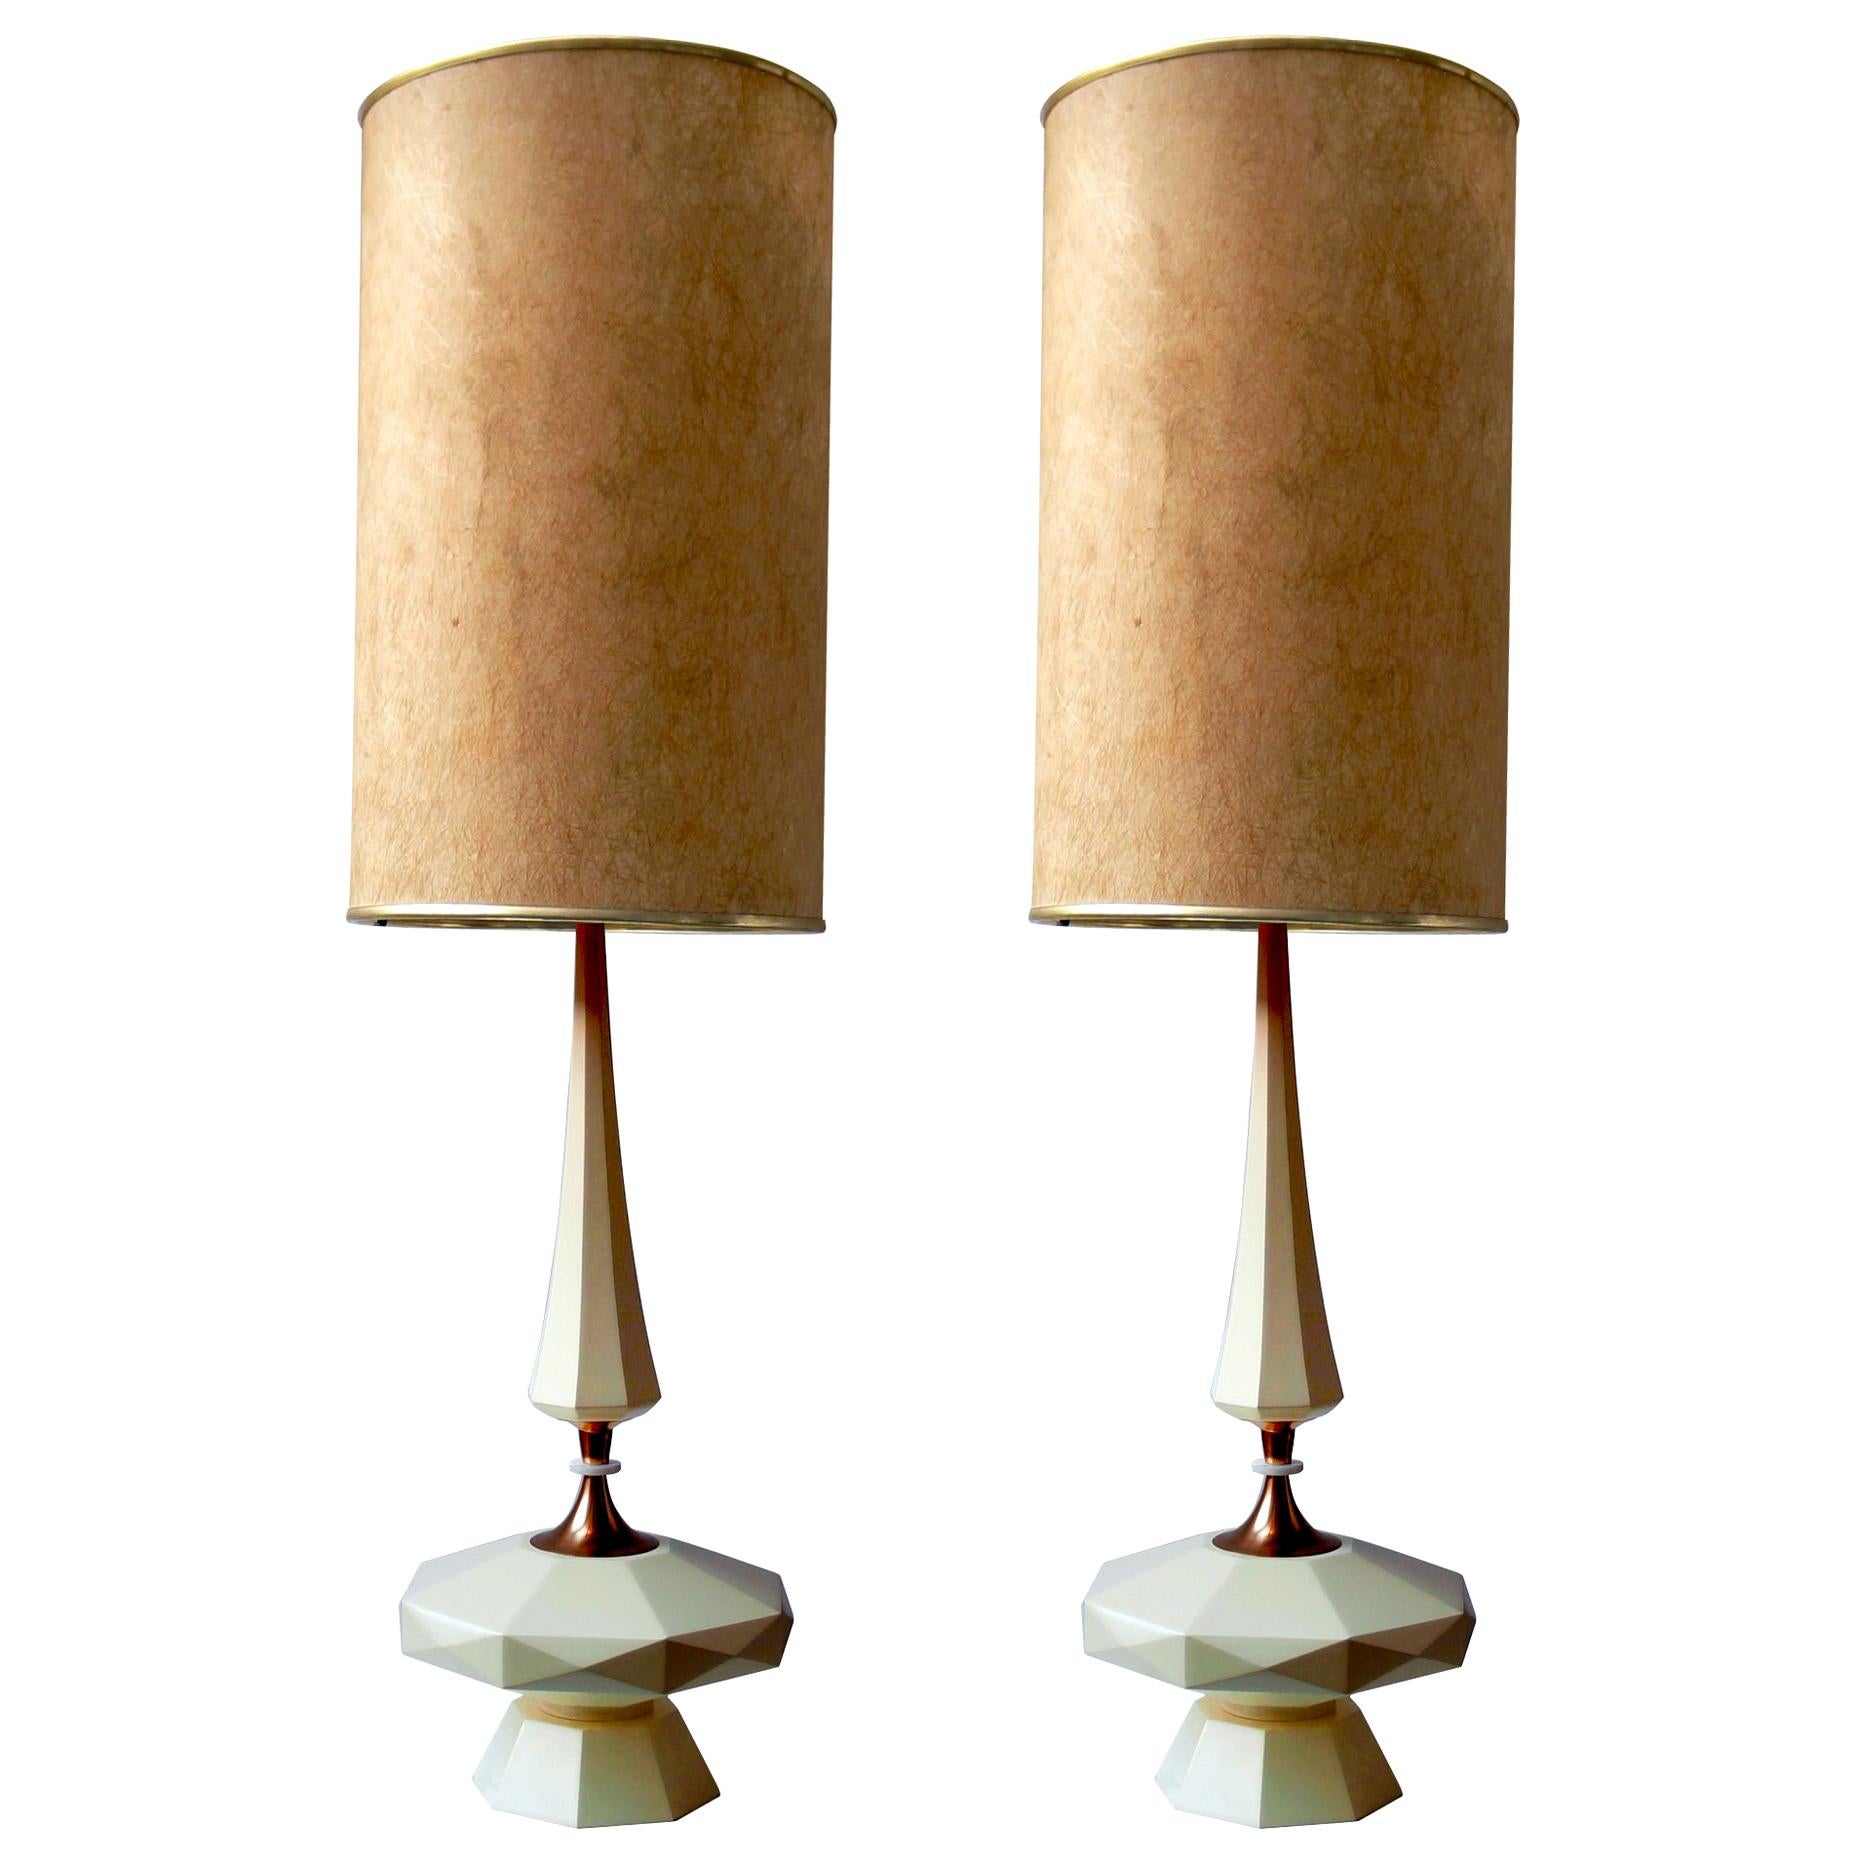 Table Lamp Mid-Century Modern Architectural Wood and Brass, 1950s